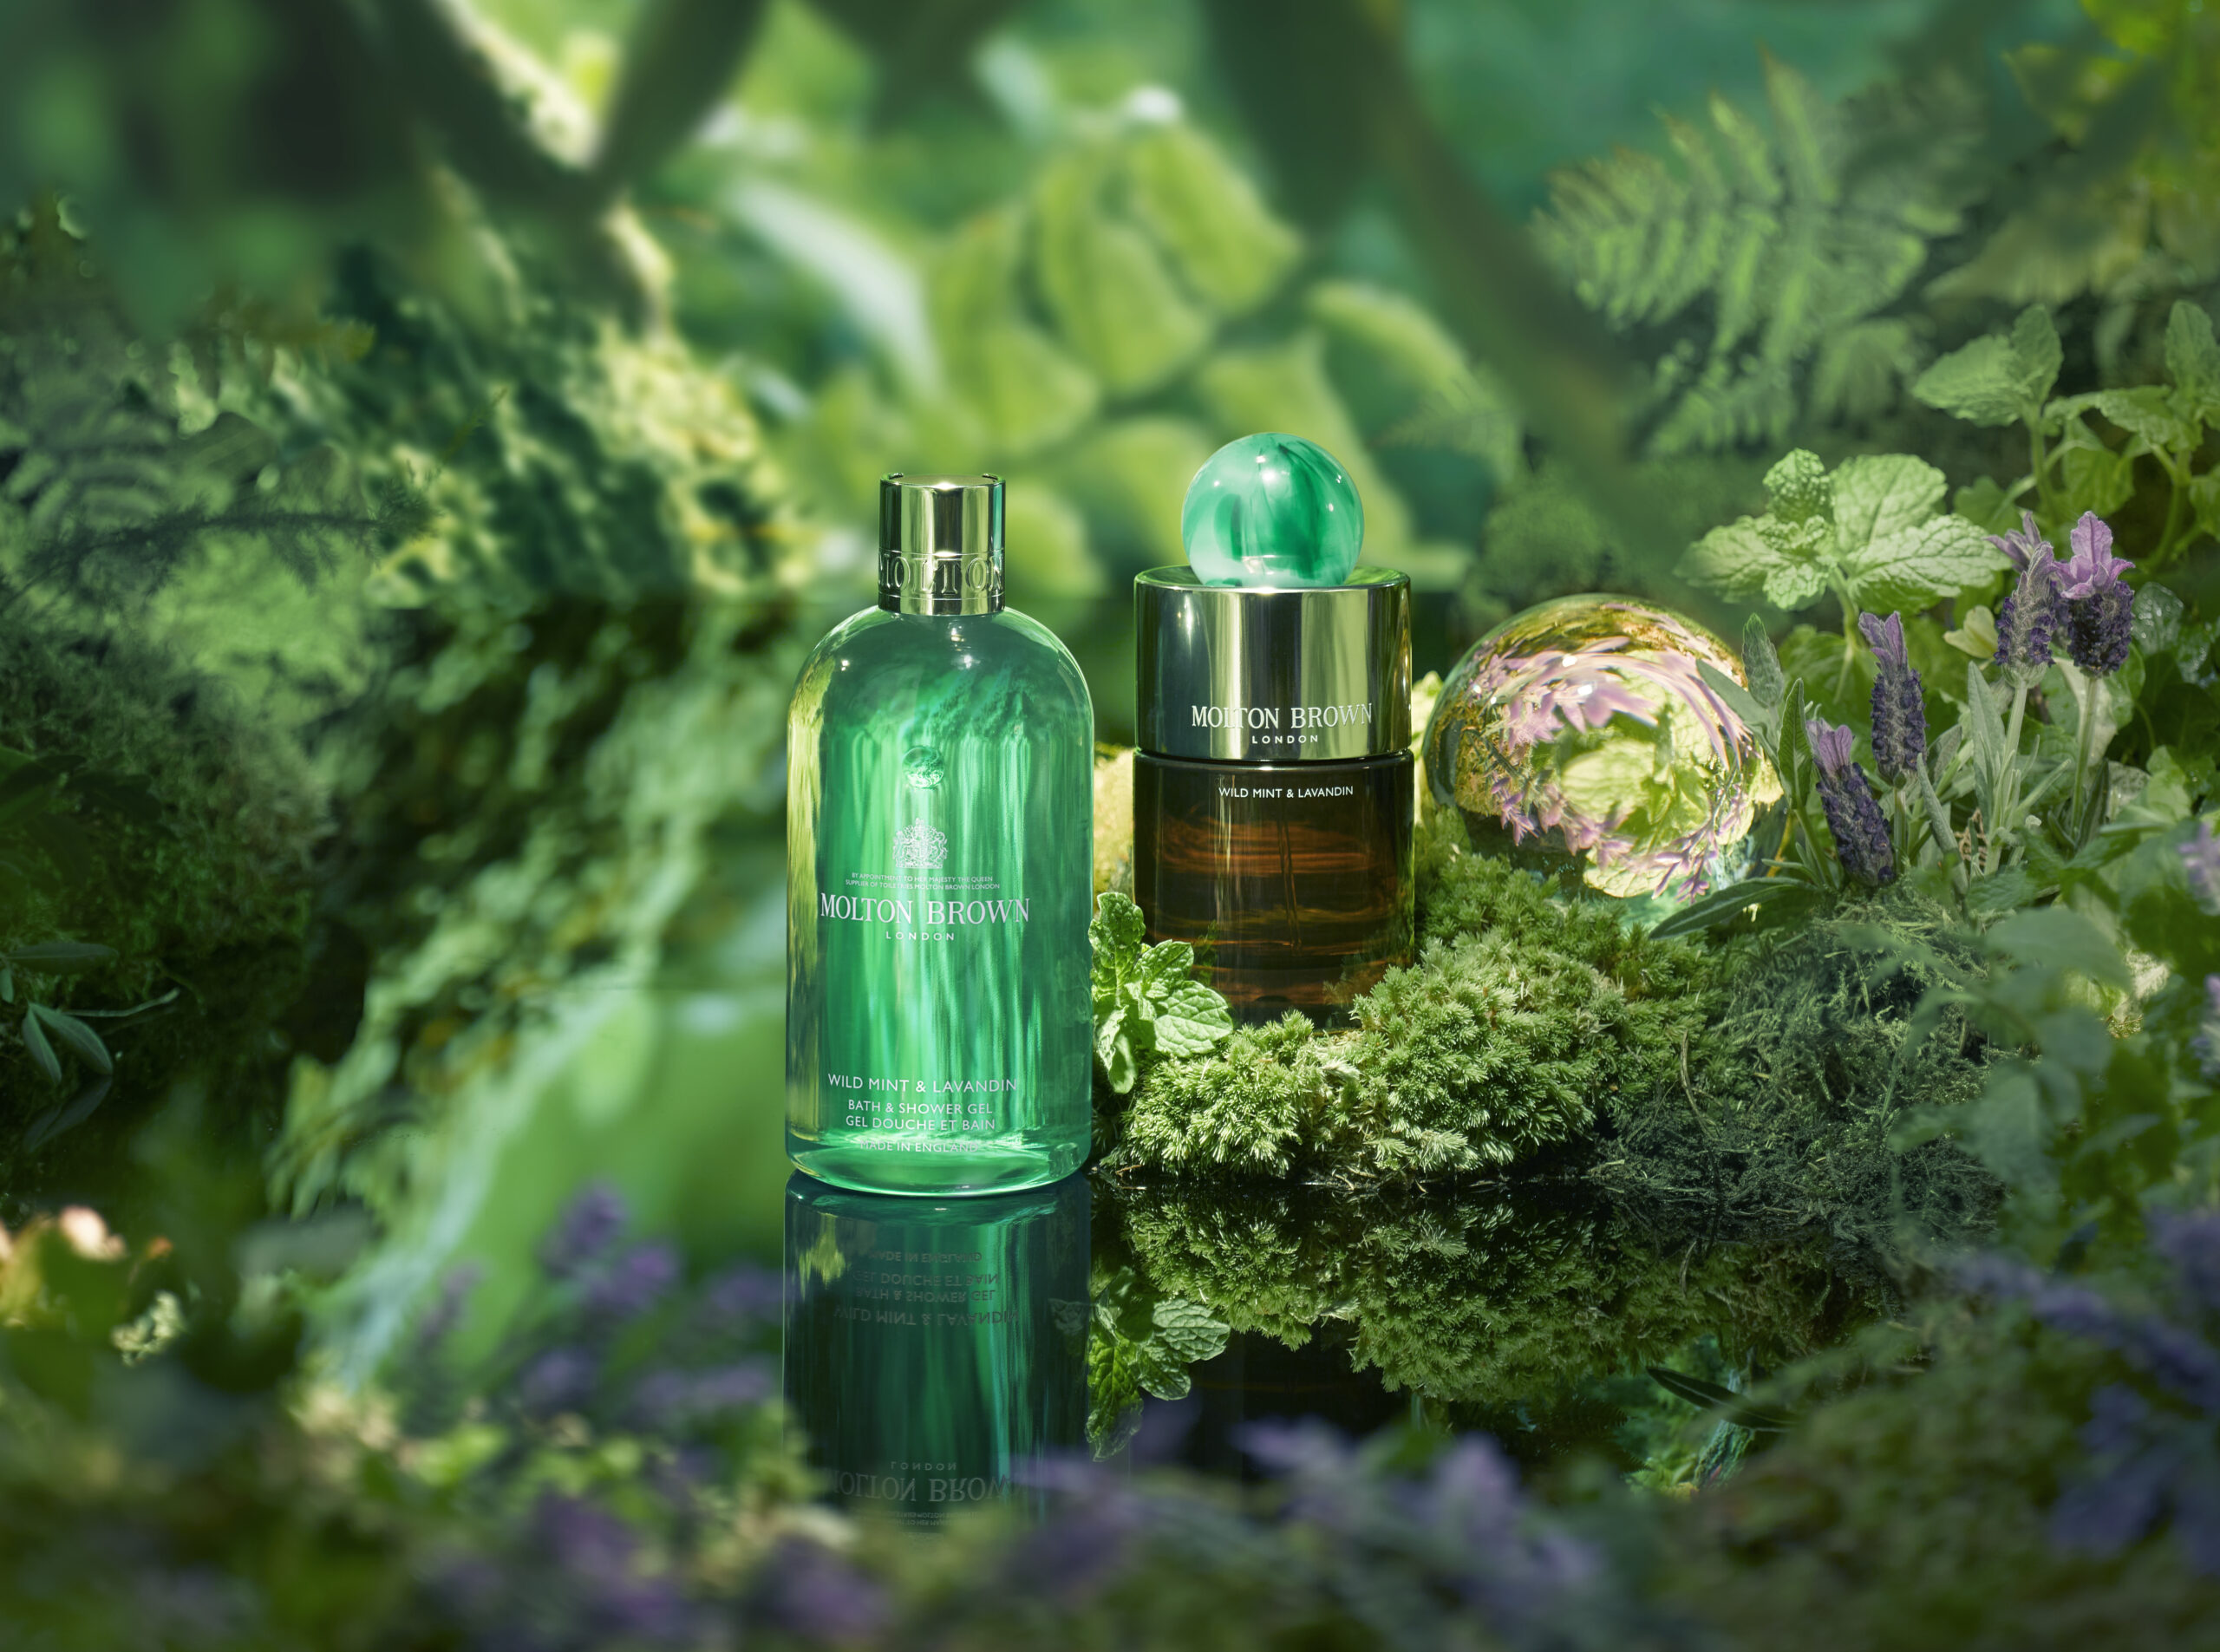 Molton Brown brings immersive digital experiences in latest campaign ...